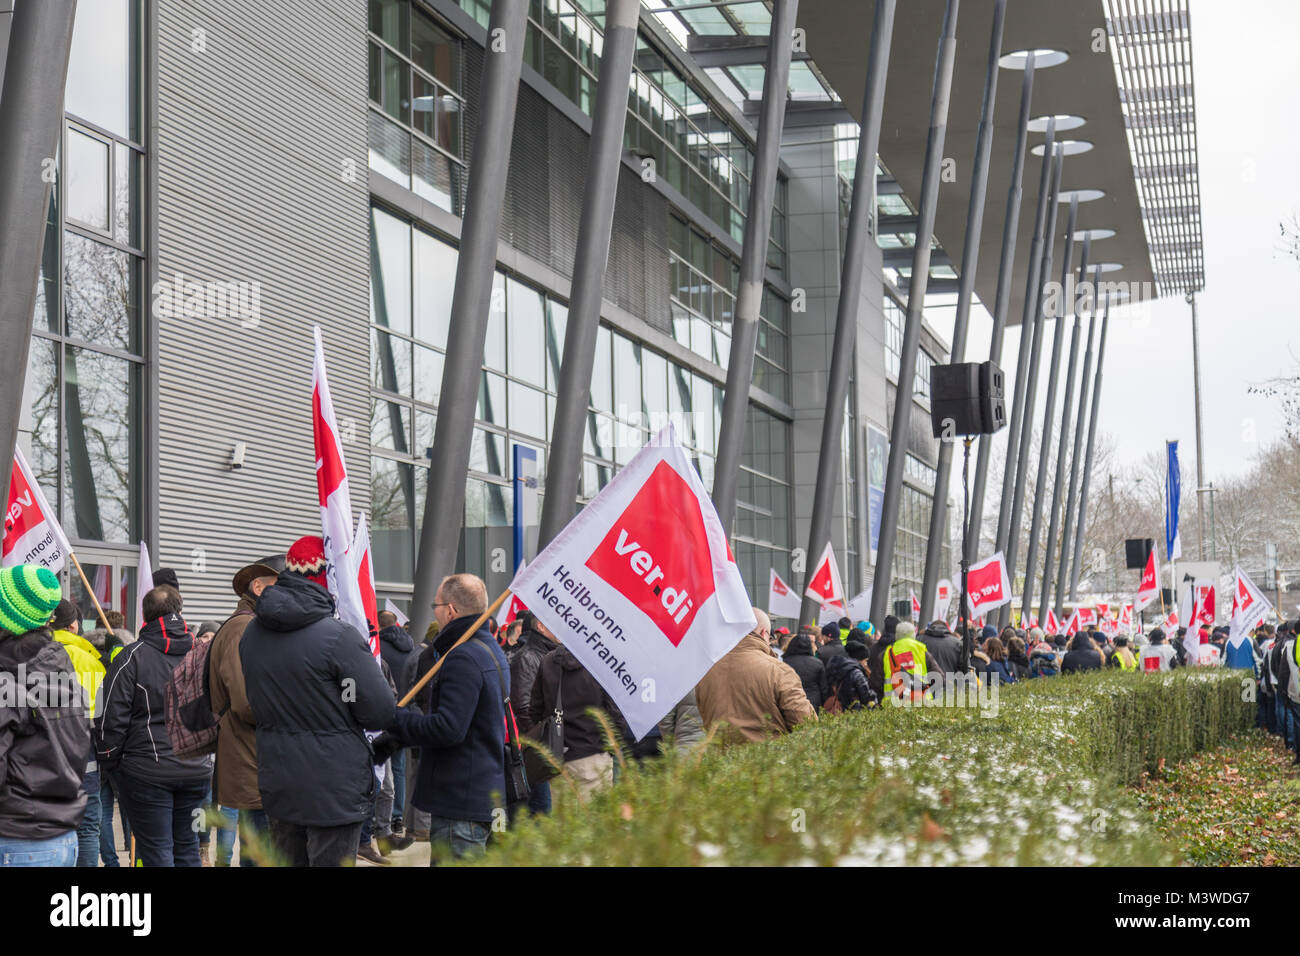 Verdi - Work stoppage and warnstrike, with over regional employees, for more salary at the EnBW facility in Karlsruhe, Germany on 5. feb 2018 Stock Photo